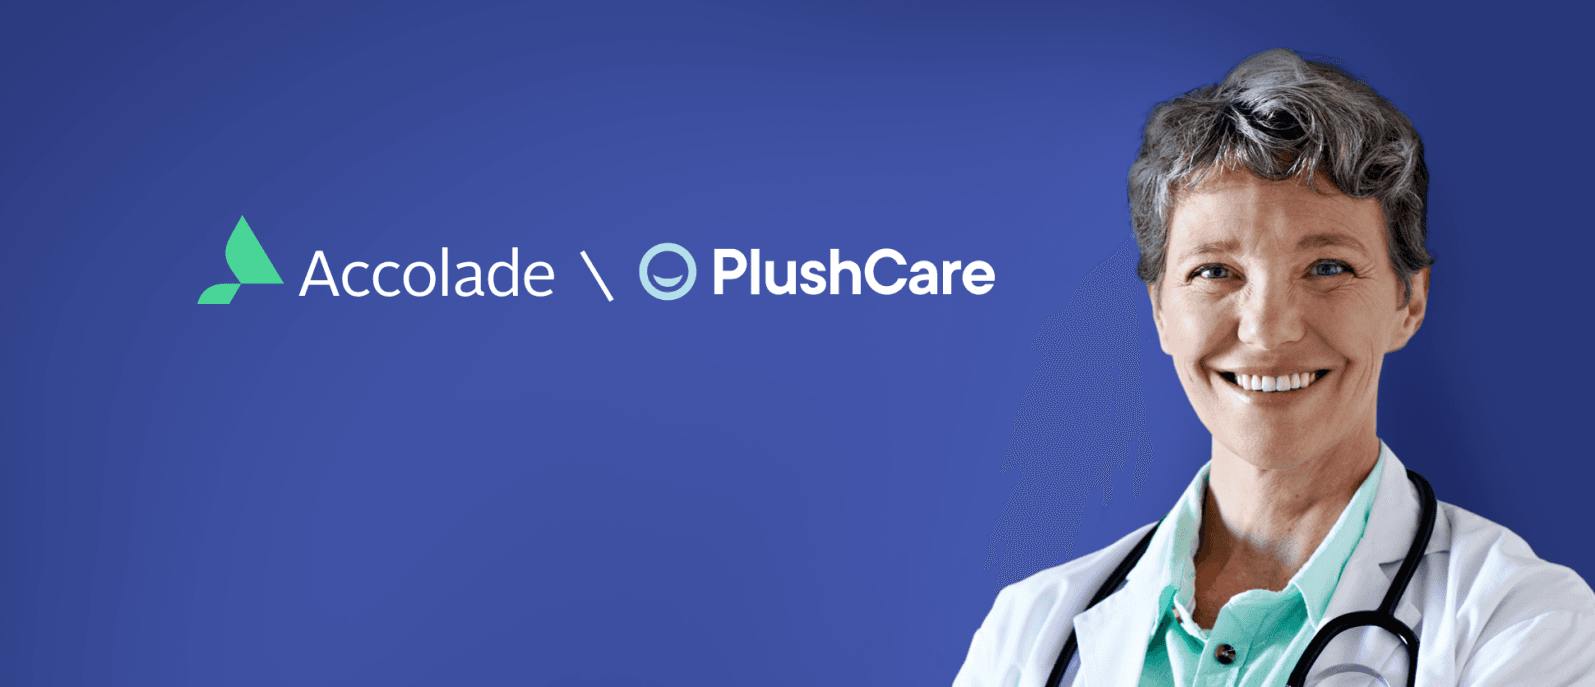 Header Image for Accolade PlushCare Acquisition Blog